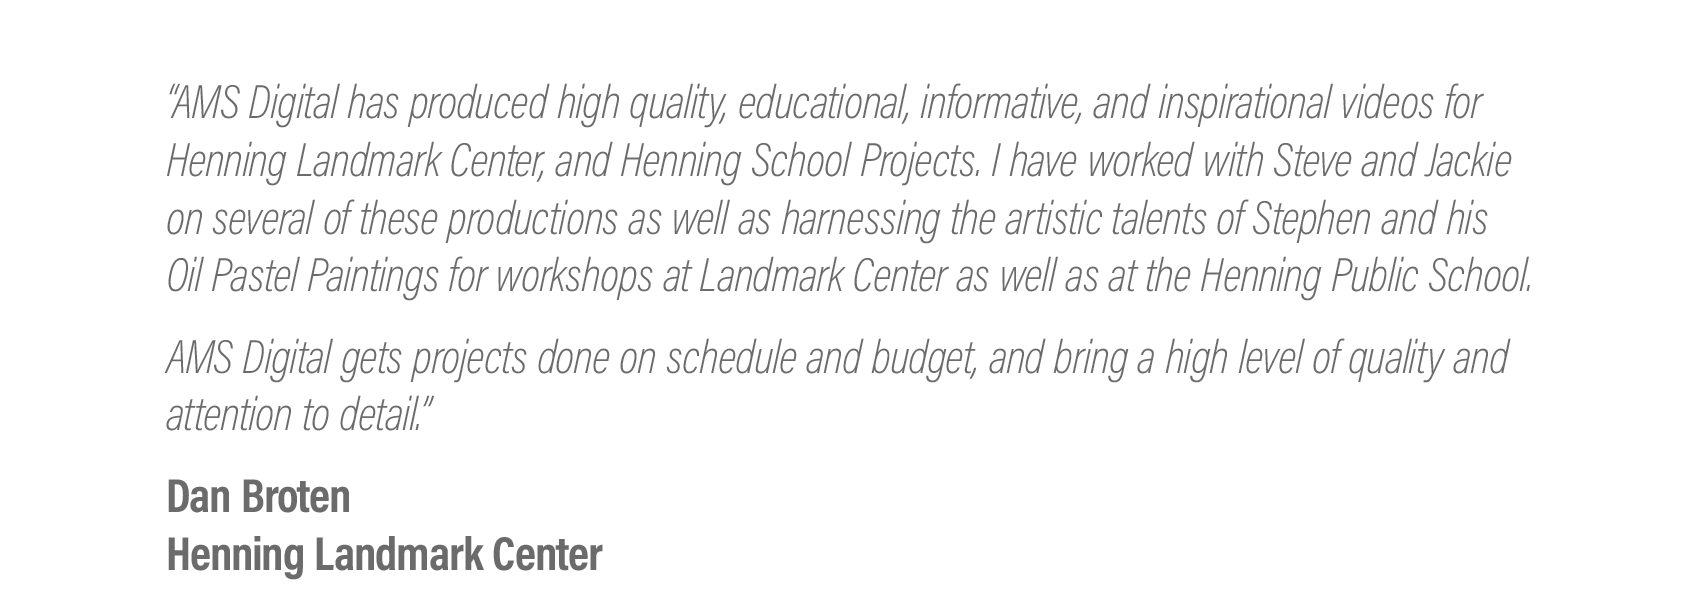  “AMS Digital has produced high quality, educational, informative, and inspirational videos for Henning Landmark Center, Henning School Projects, and organizational videos for Lake Region Arts Council and the West Central Initiative "Live Wide Open" 